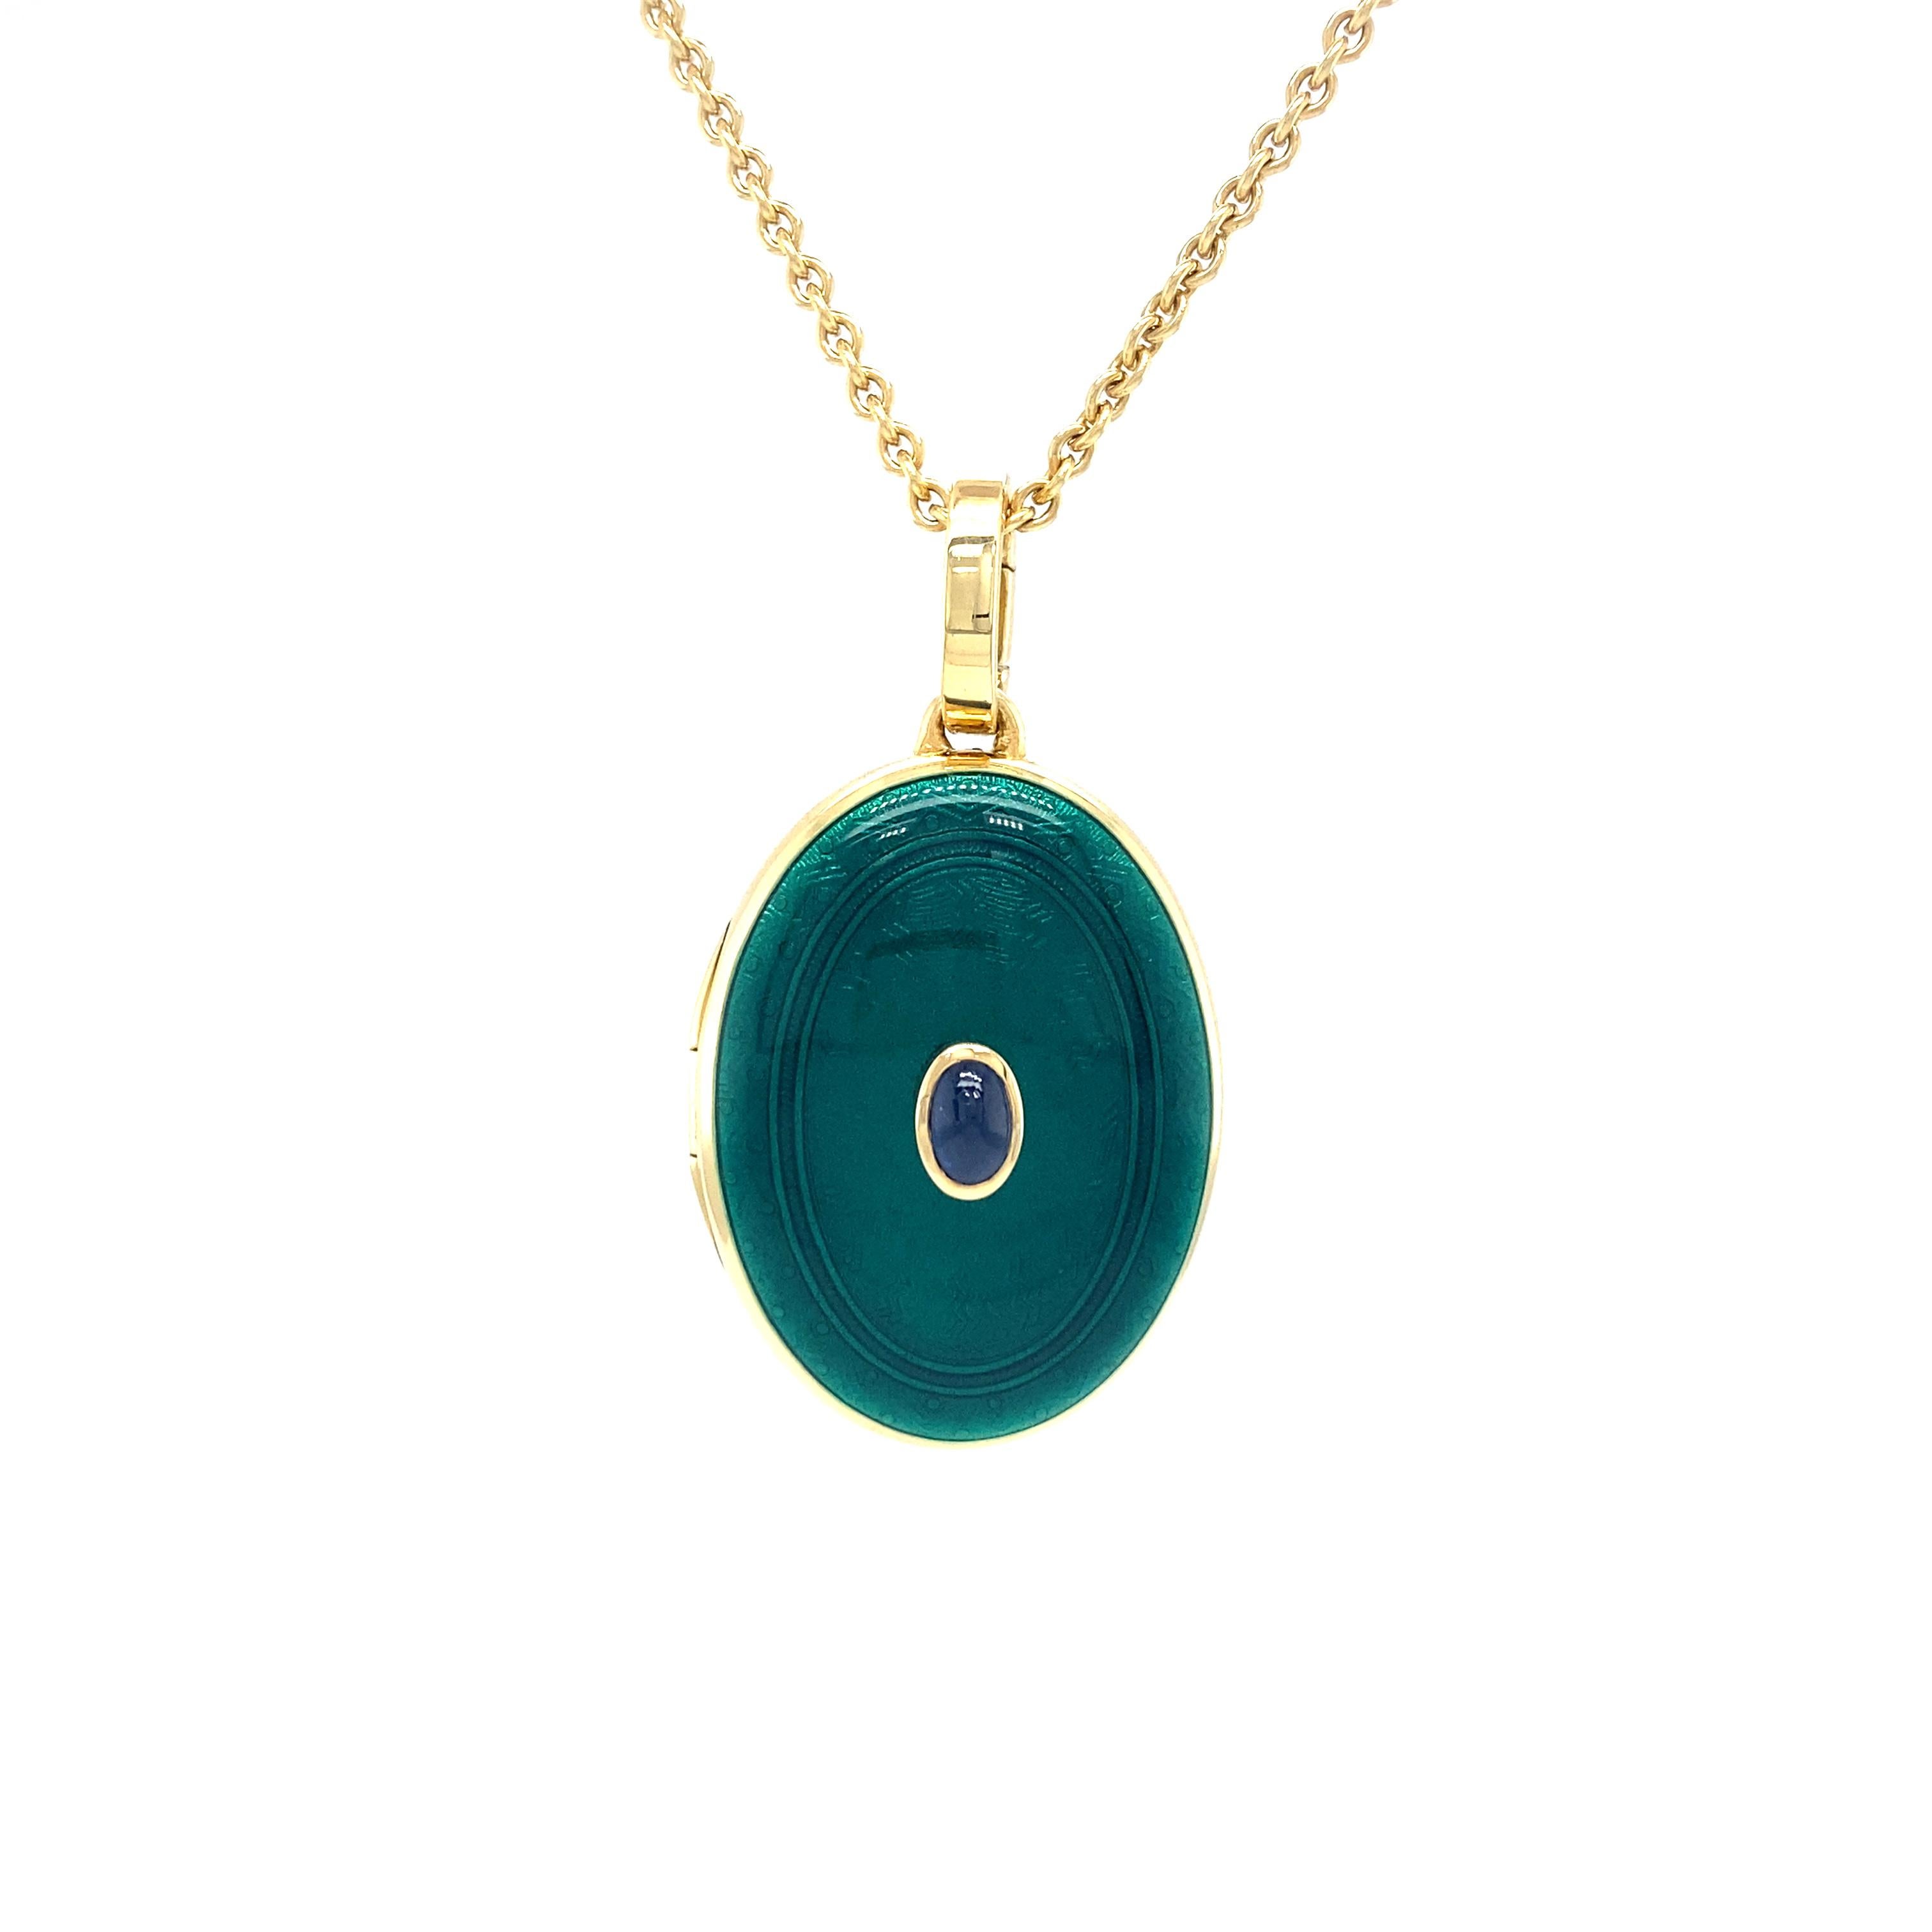 Victor Mayer oval locket pendant 18k yellow gold, translucent emerald green vitreous enamel, guilloche, 1 oval blue sapphire, cabochon, total 0.37 ct, measurements app. 27.5 mm x 21.0 mm

About the creator Victor Mayer
Victor Mayer is